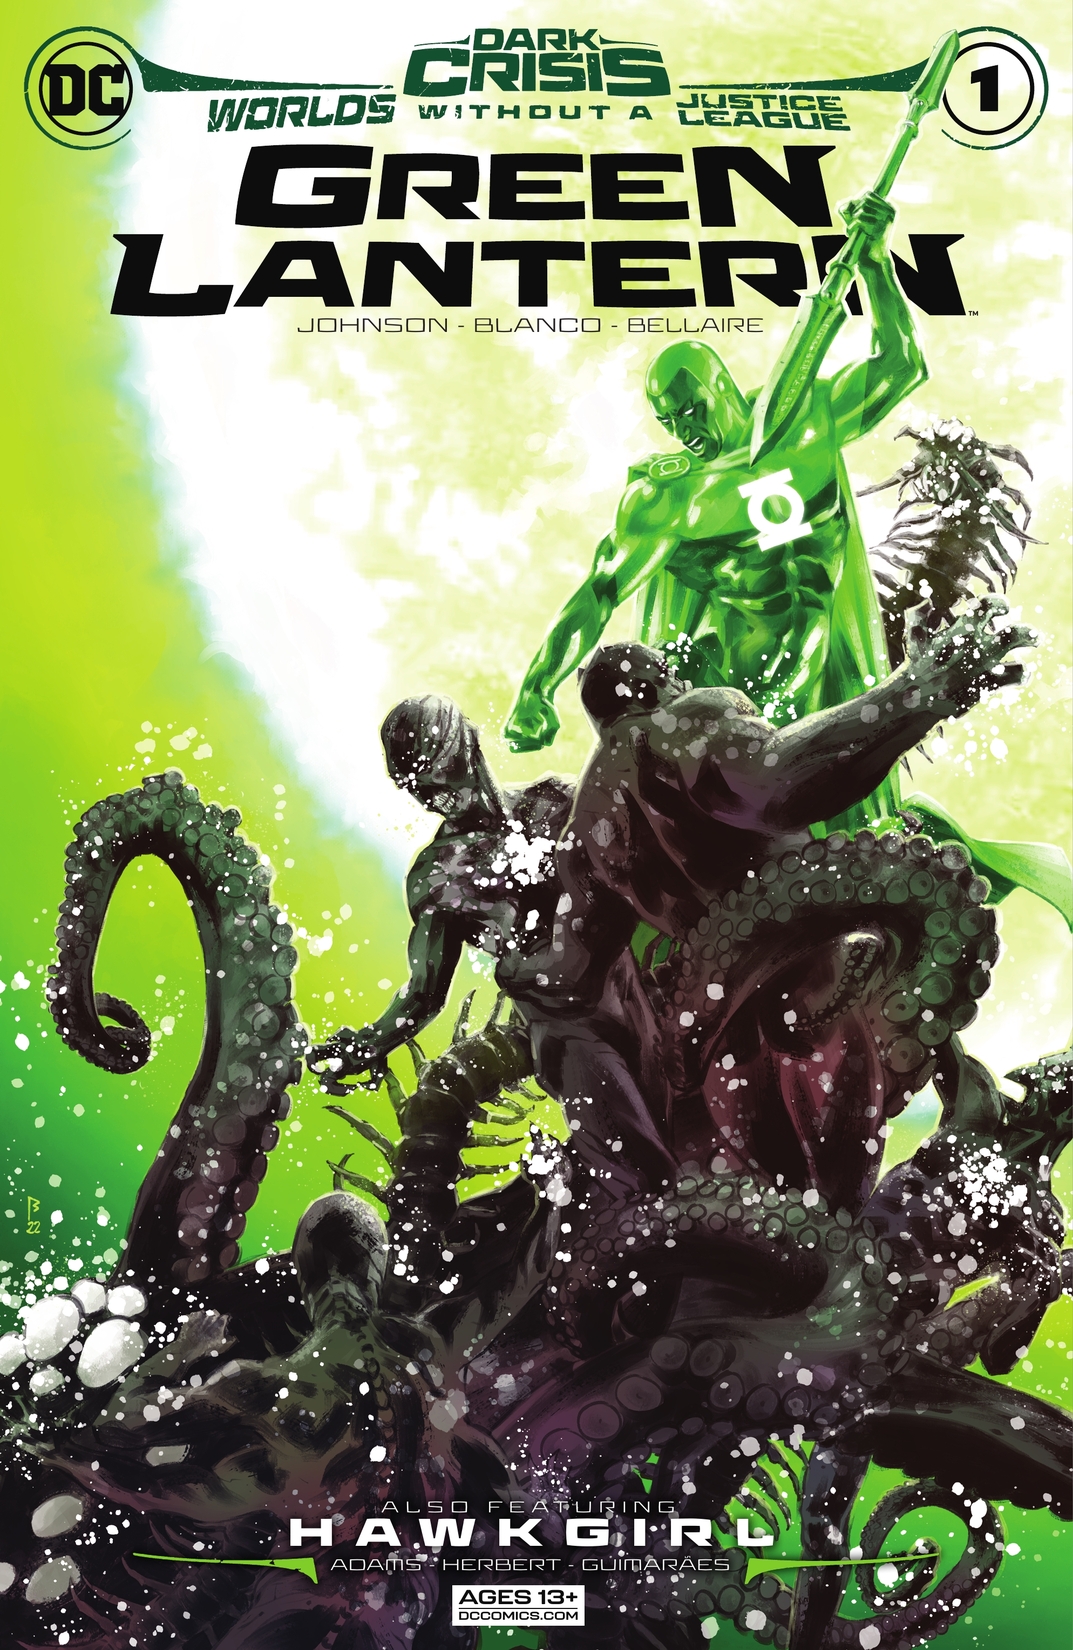 Dark Crisis: Worlds Without A Justice League - Green Lantern #1 preview images